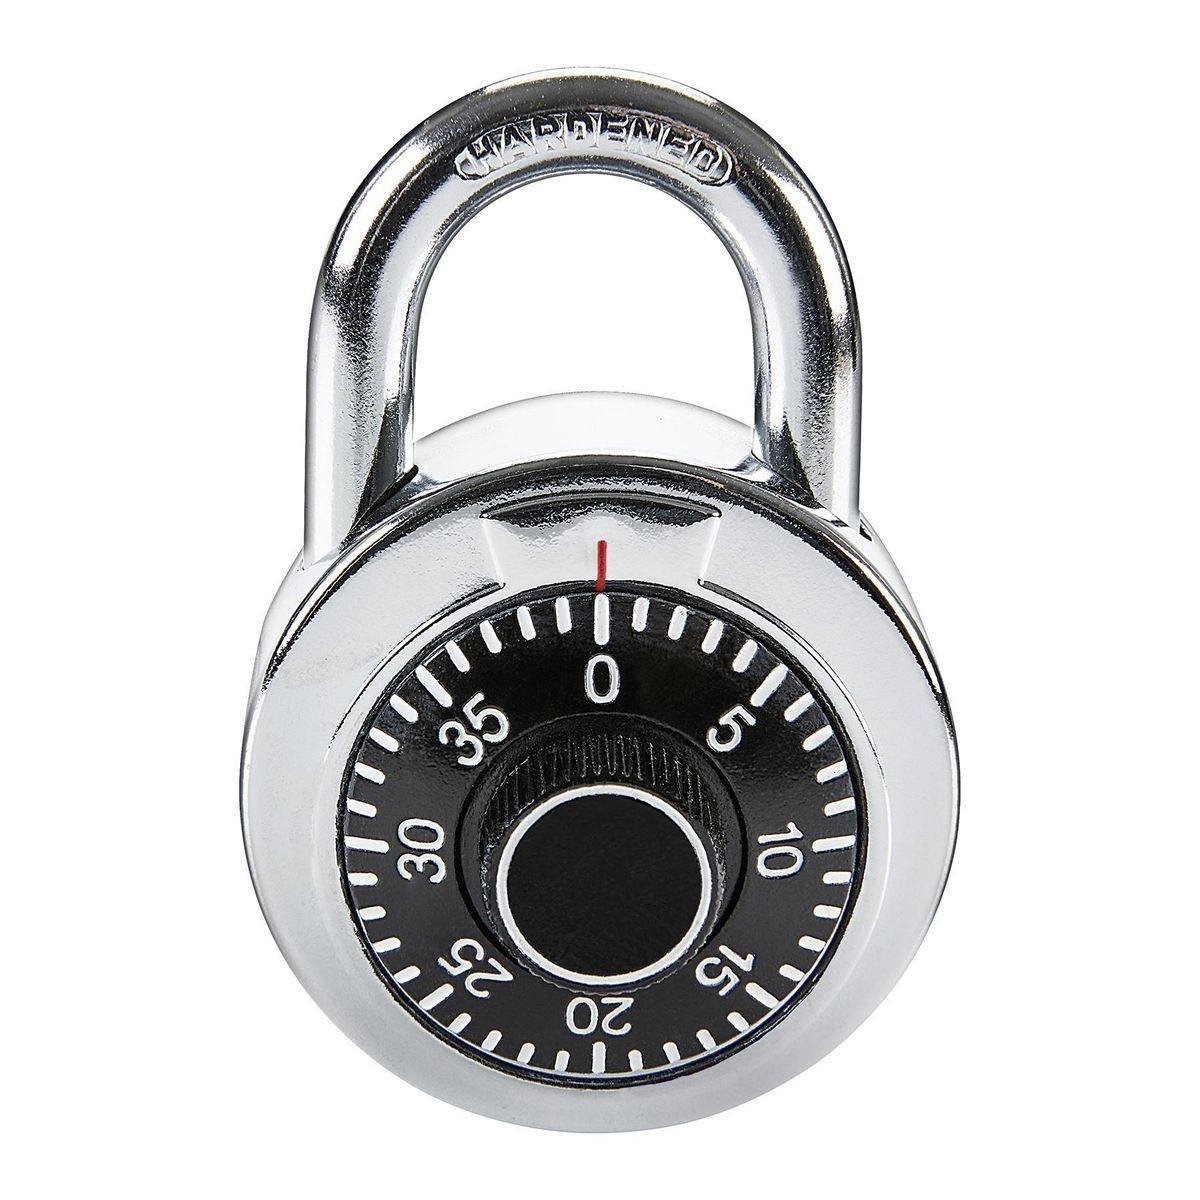 BUNKER HILL SECURITY 2 in. General Security Combination Padlock